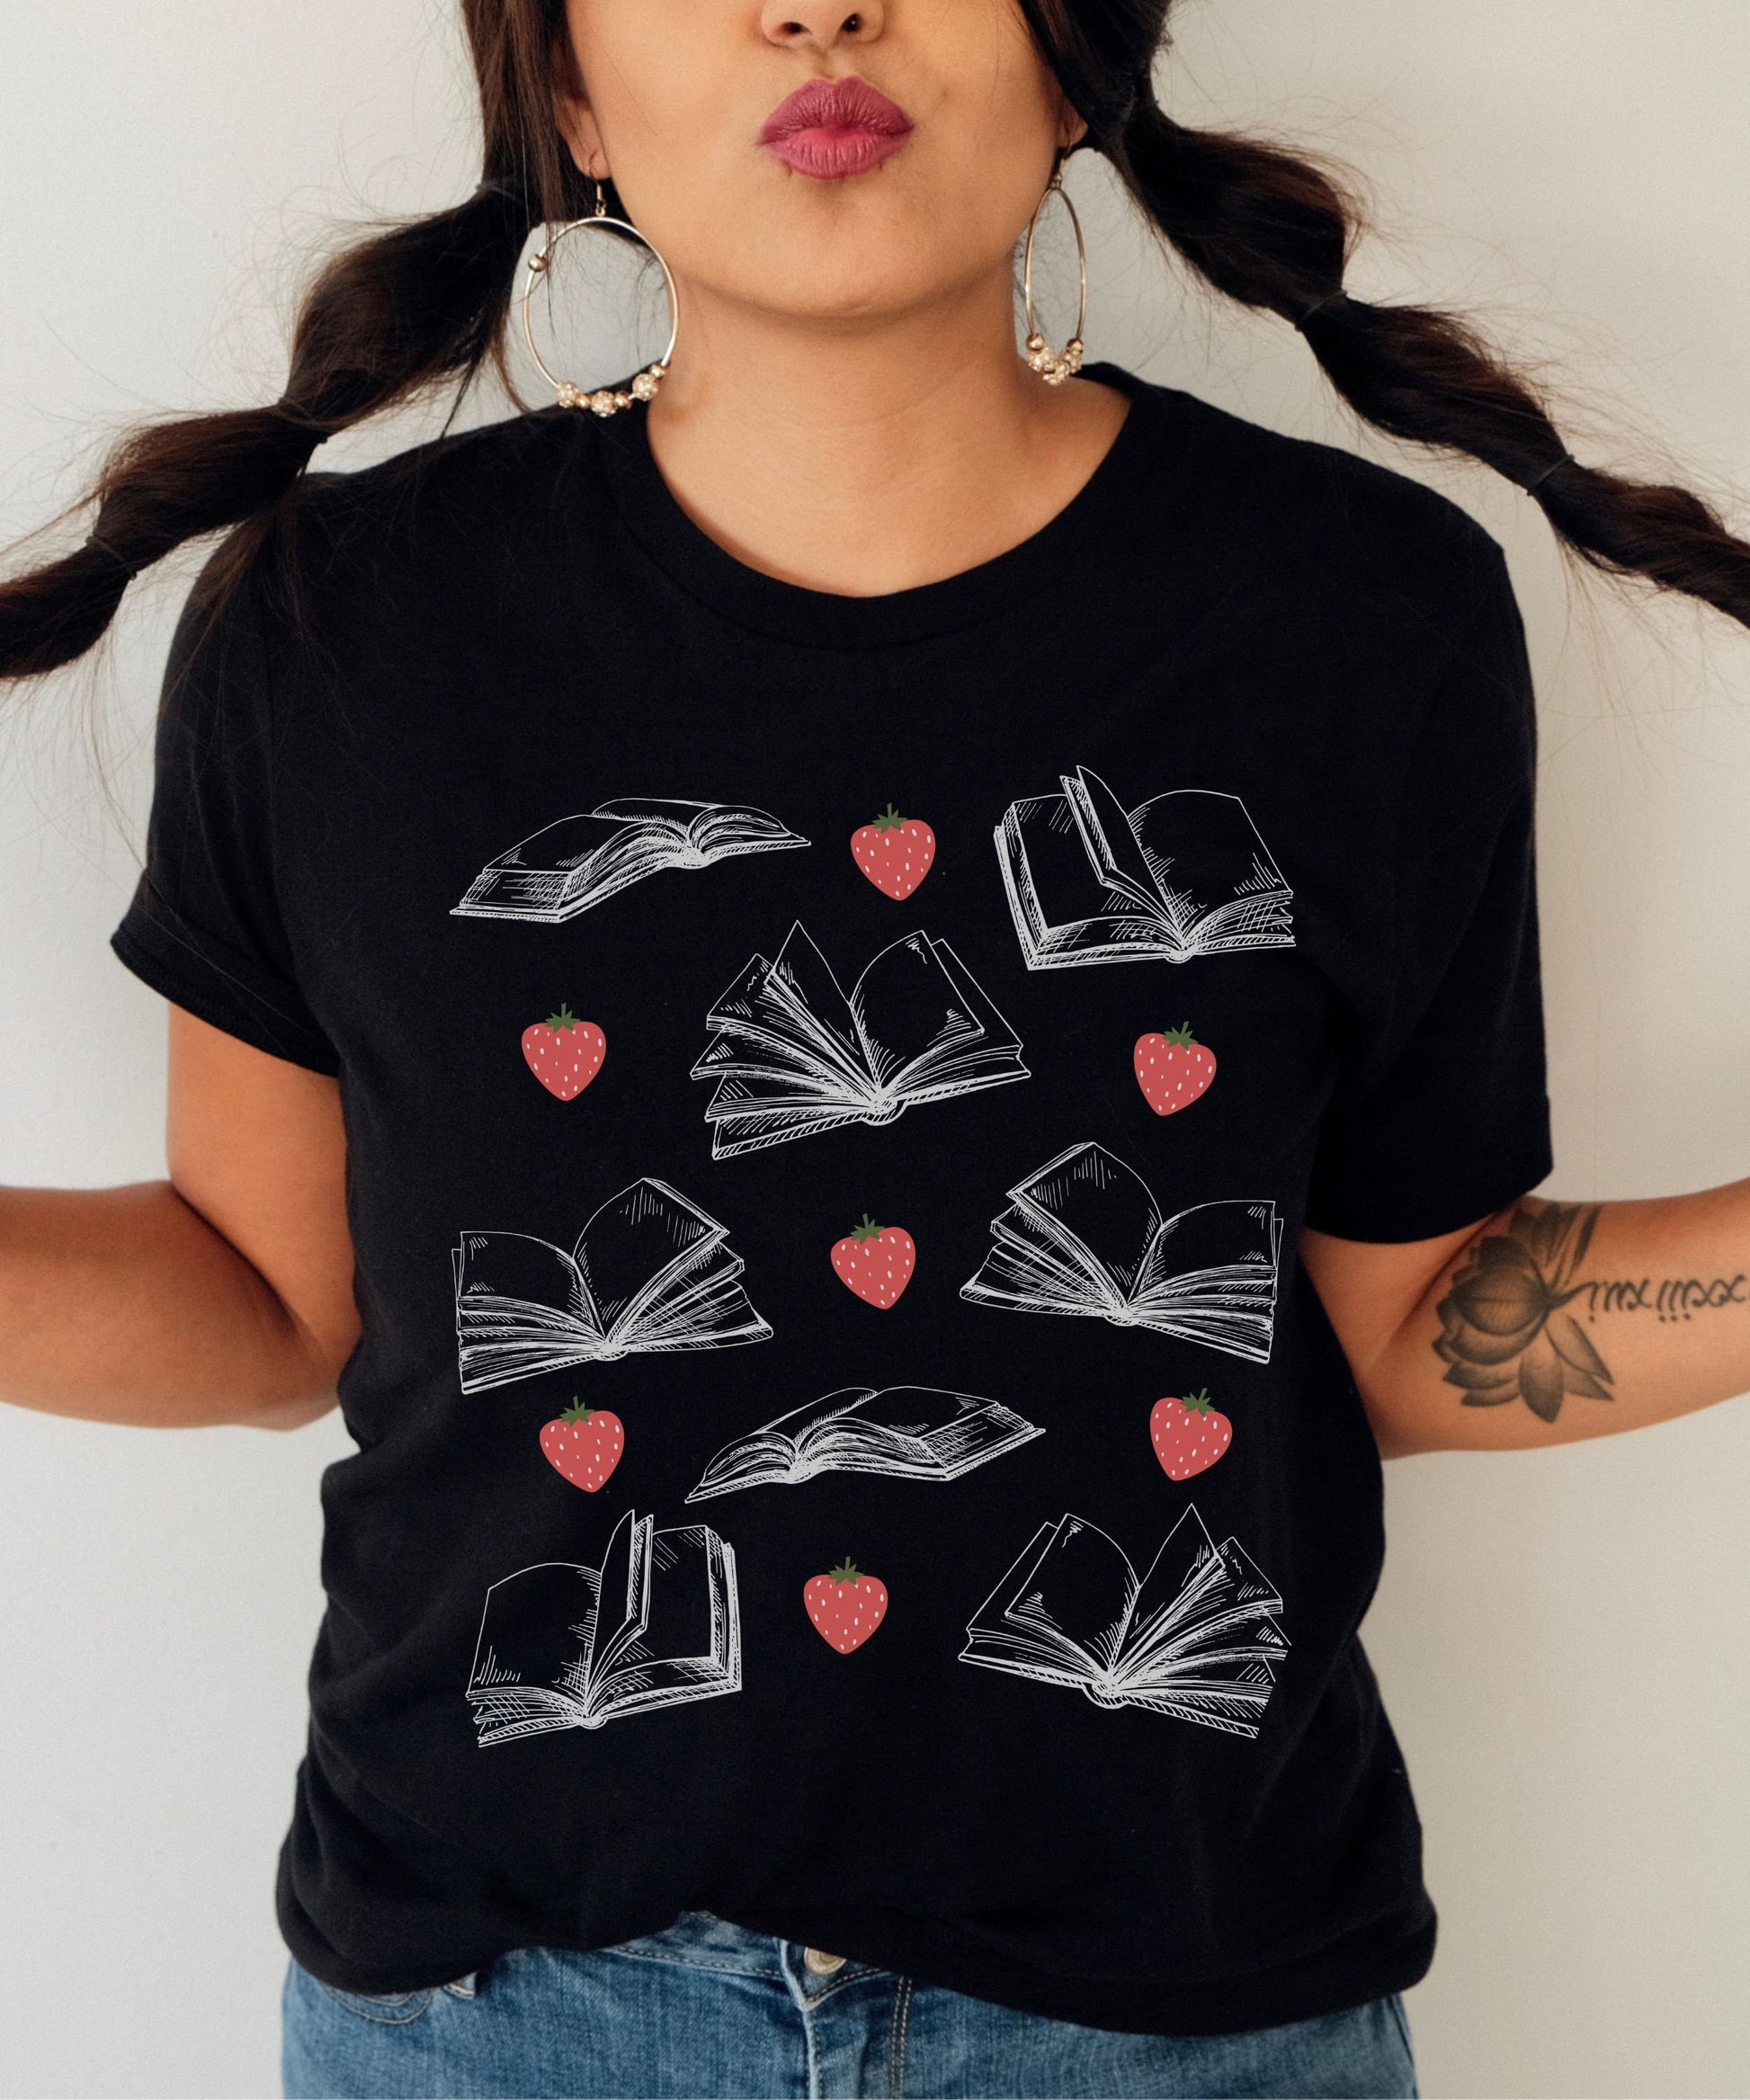 Books and Berries Shirt Strawberry Shirt Bookish T-shirts, Bookish Things Cottagecore Clothes Literary Shirt Light Academia Booklover Tee